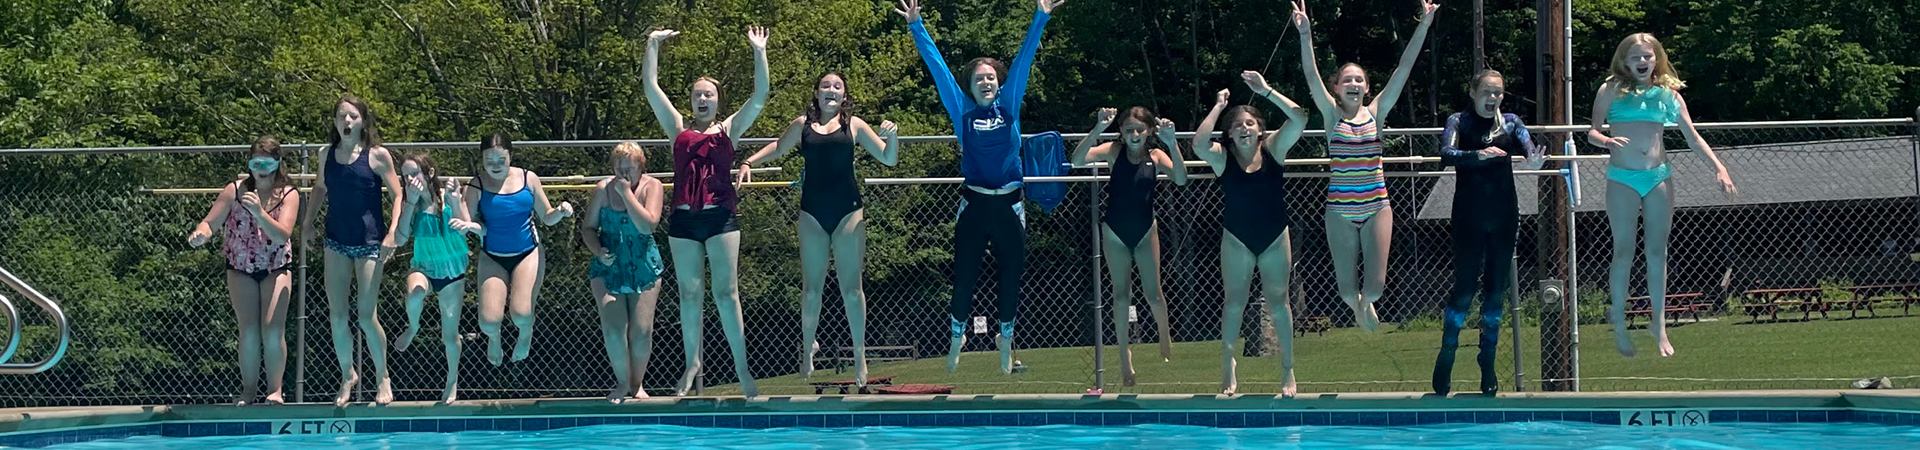  Girl Scouts jumping into a pool 